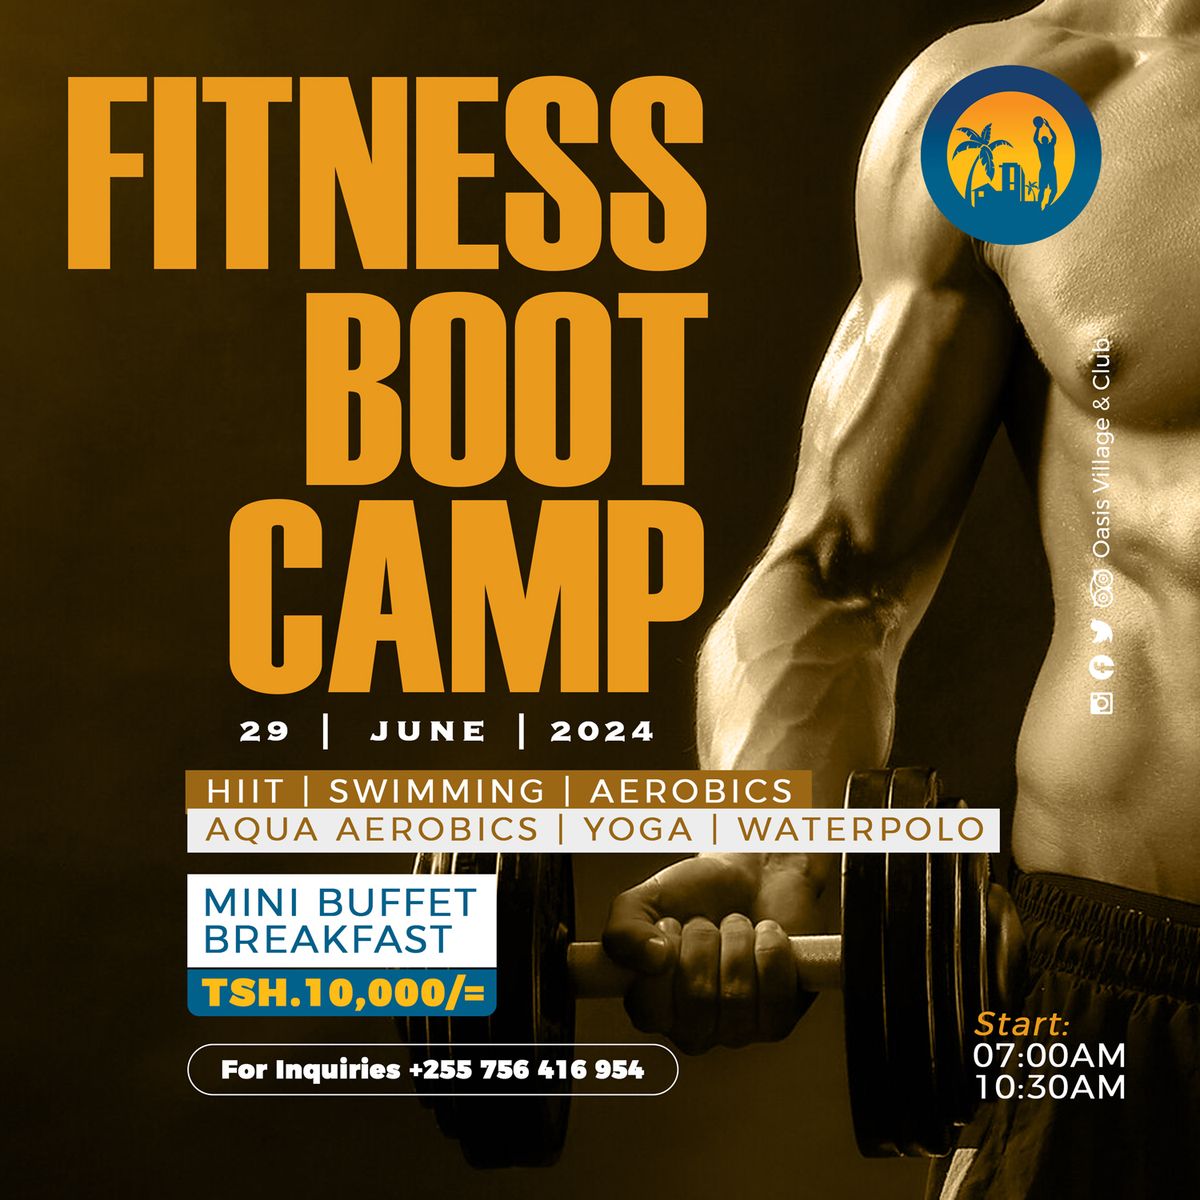 Fitness Bootcamp 29 | 6 | 2024